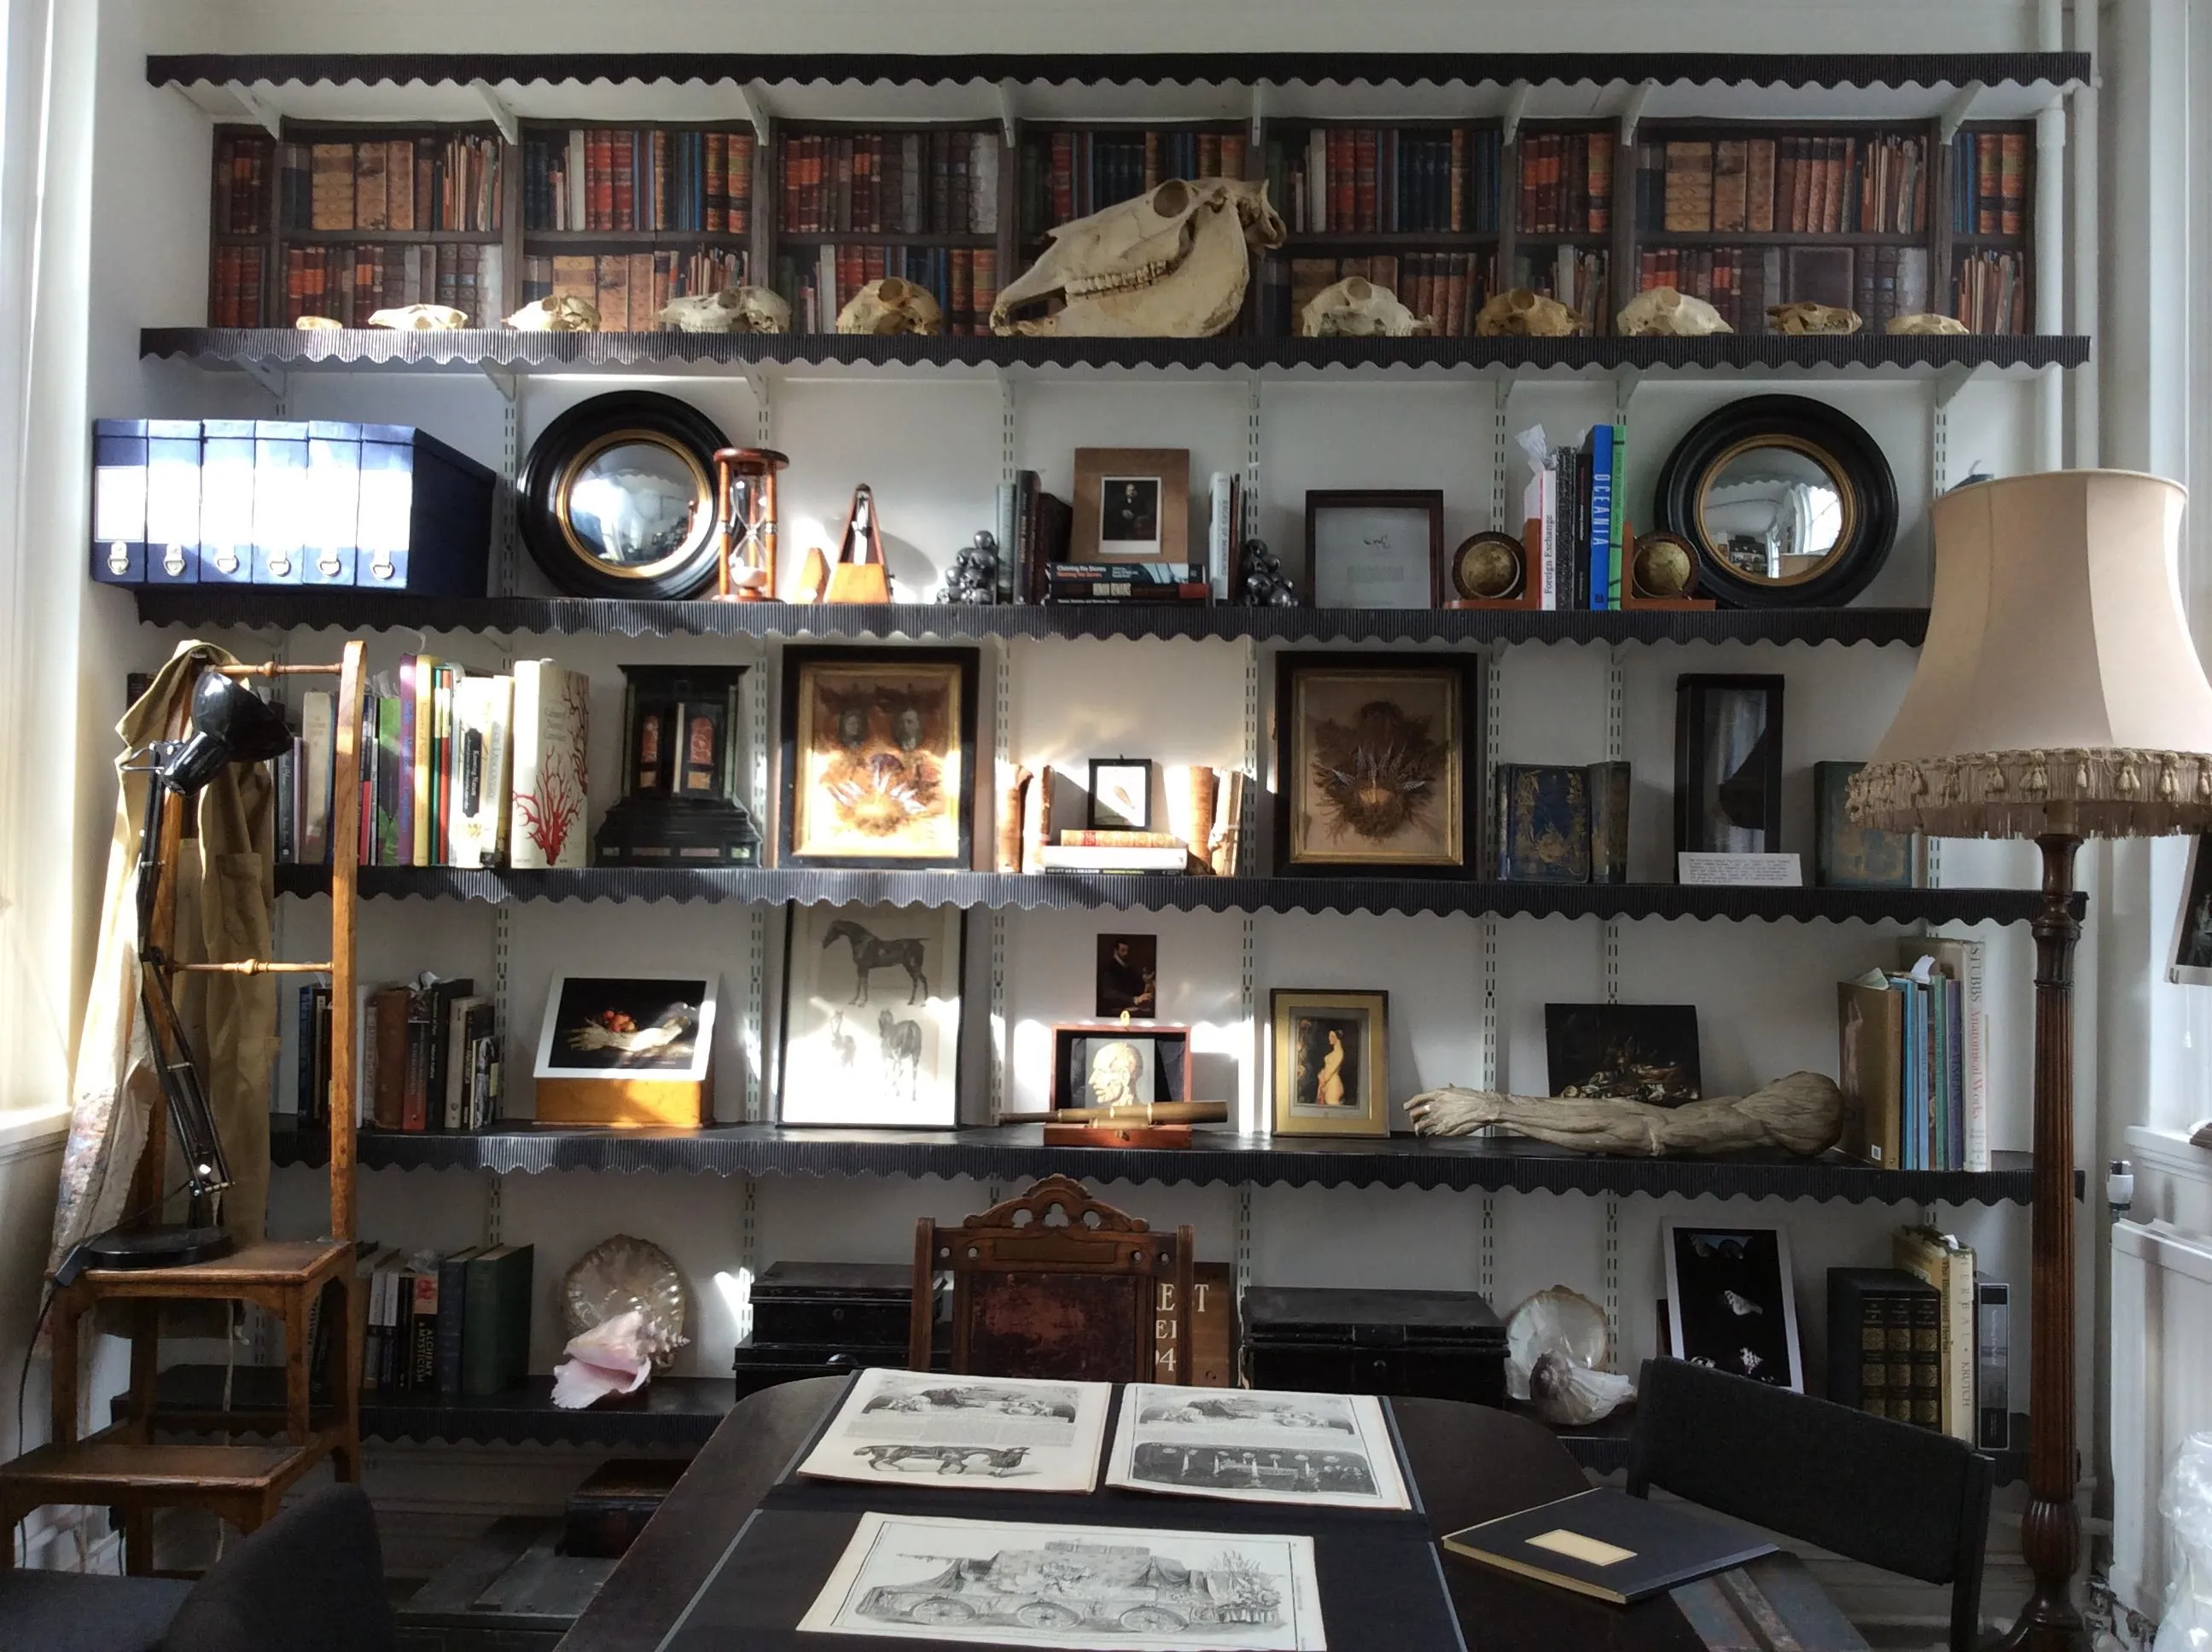 Image of shelving with framed photgraphs and books and animal skulls 